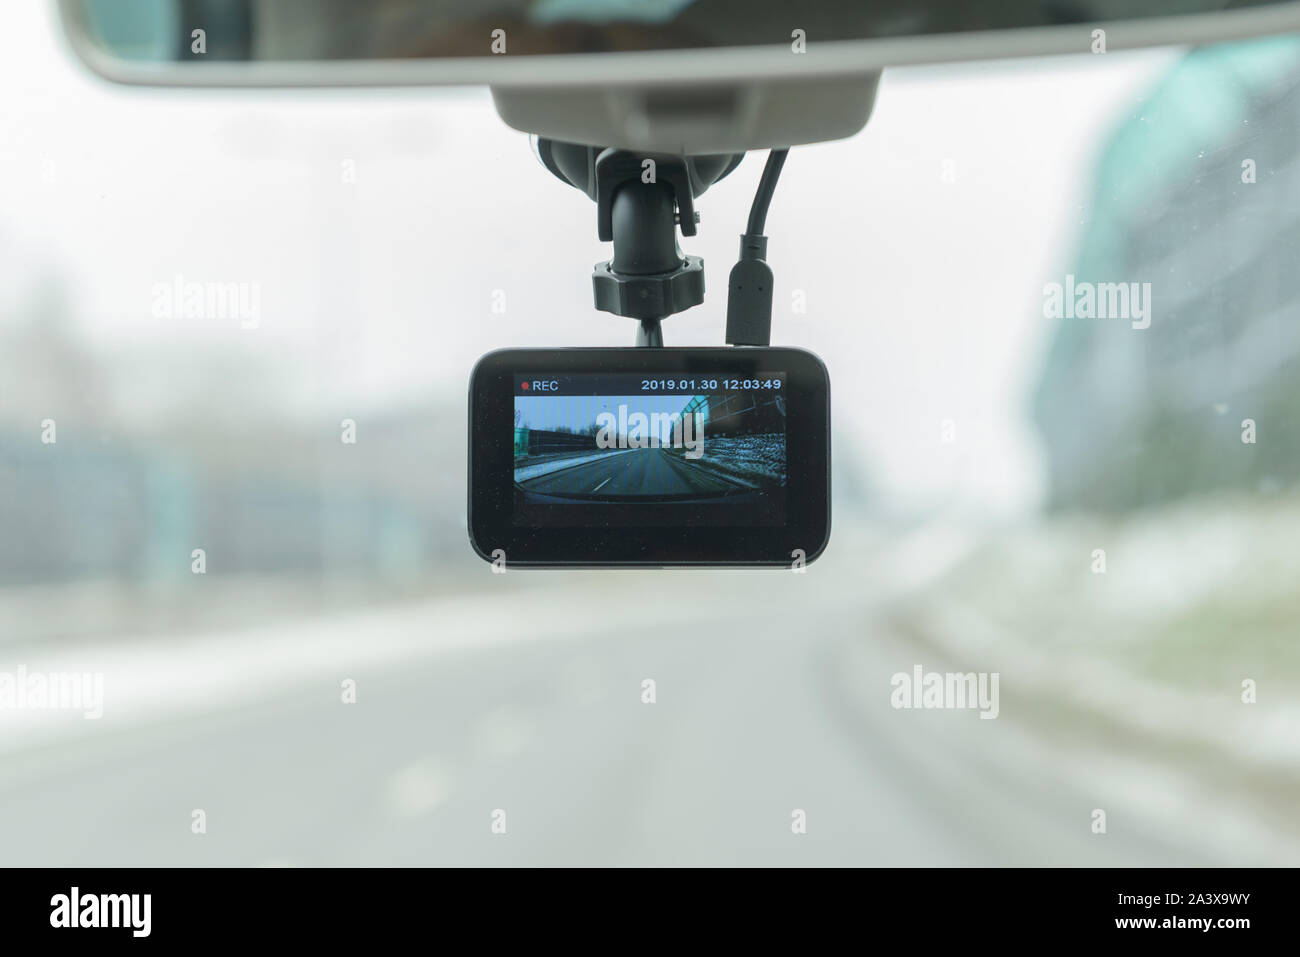 https://c8.alamy.com/comp/2A3X9WY/using-dashboard-camera-to-continuously-record-a-view-through-a-vehicles-front-windscreen-2A3X9WY.jpg